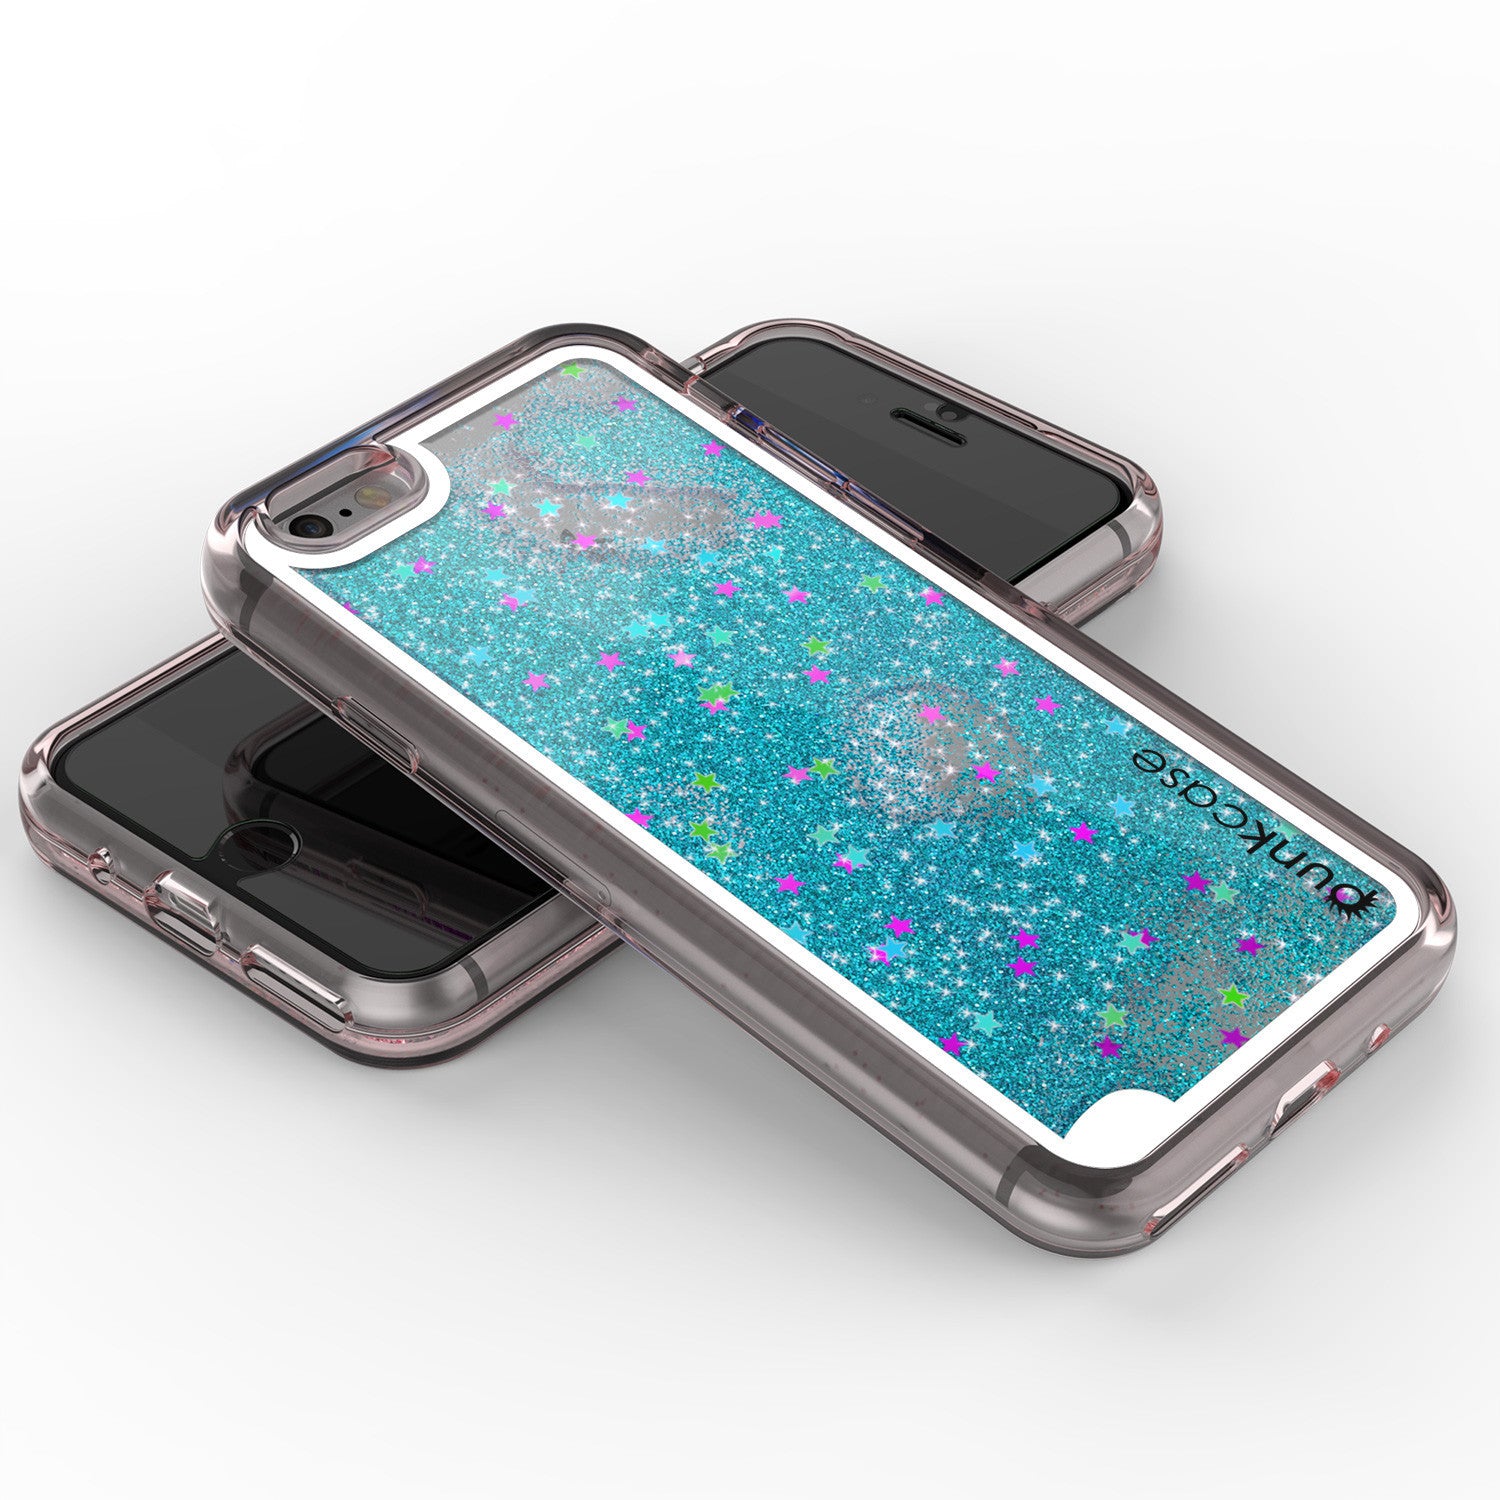 iPhone 7 Case, PunkCase LIQUID Teal Series, Protective Dual Layer Floating Glitter Cover